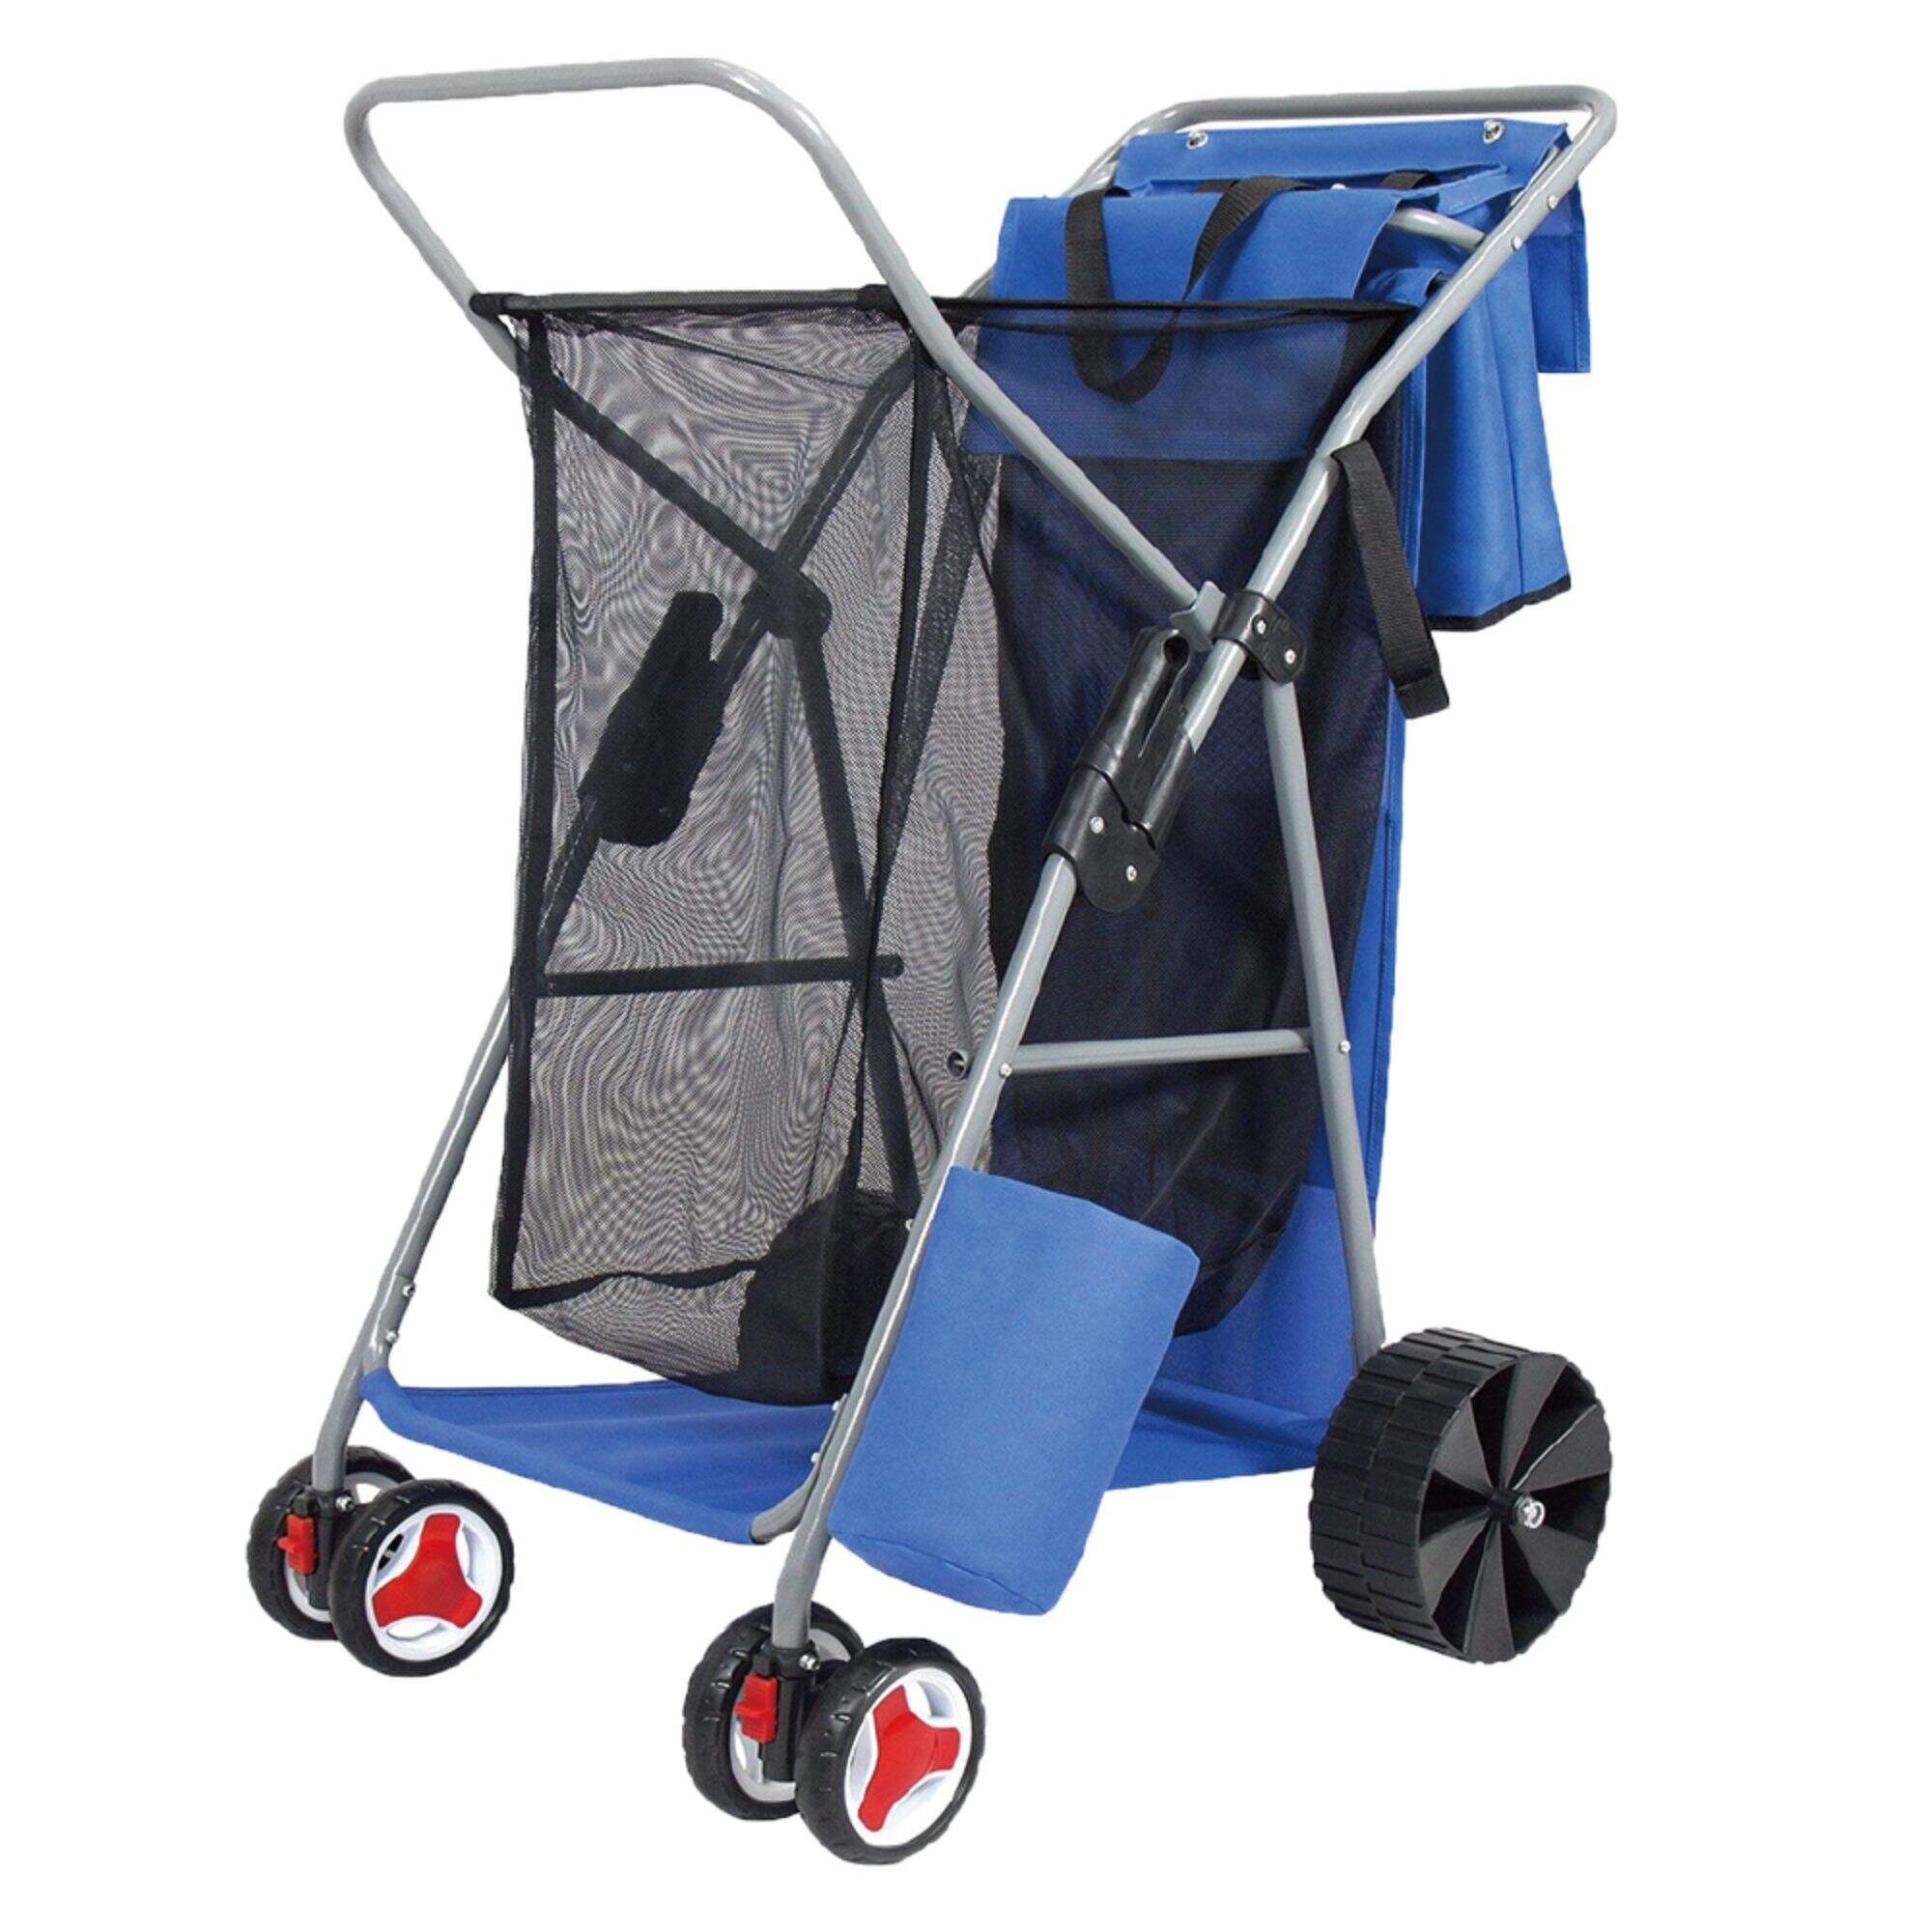 GT1810 Collapsible Beach Wagon Cart, 2 in 1 Fishing Chair Cart, for Outdoor Camping